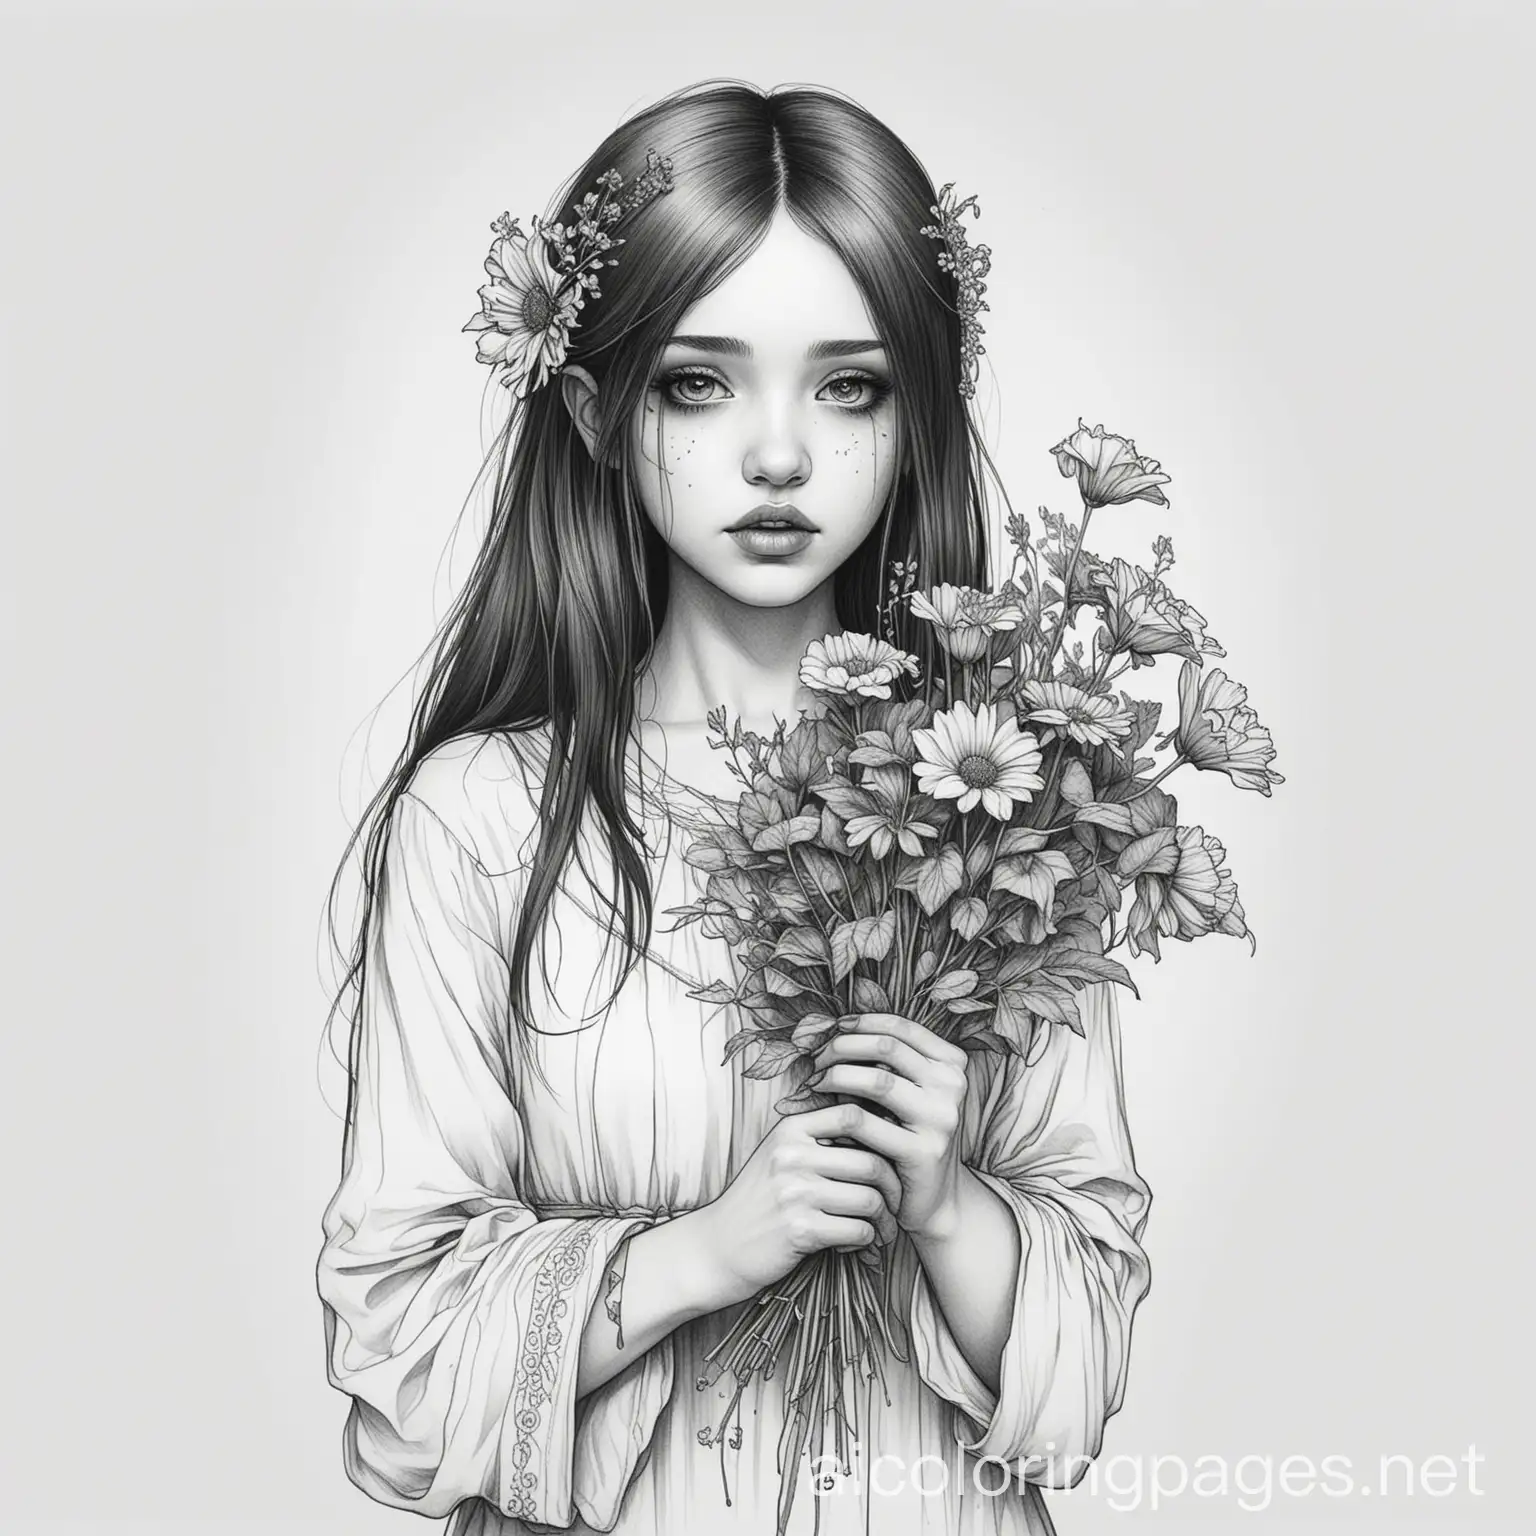 a goth girl holding wilted flowers
, Coloring Page, black and white, line art, white background, Simplicity, Ample White Space. The background of the coloring page is plain white to make it easy for young children to color within the lines. The outlines of all the subjects are easy to distinguish, making it simple for kids to color without too much difficulty